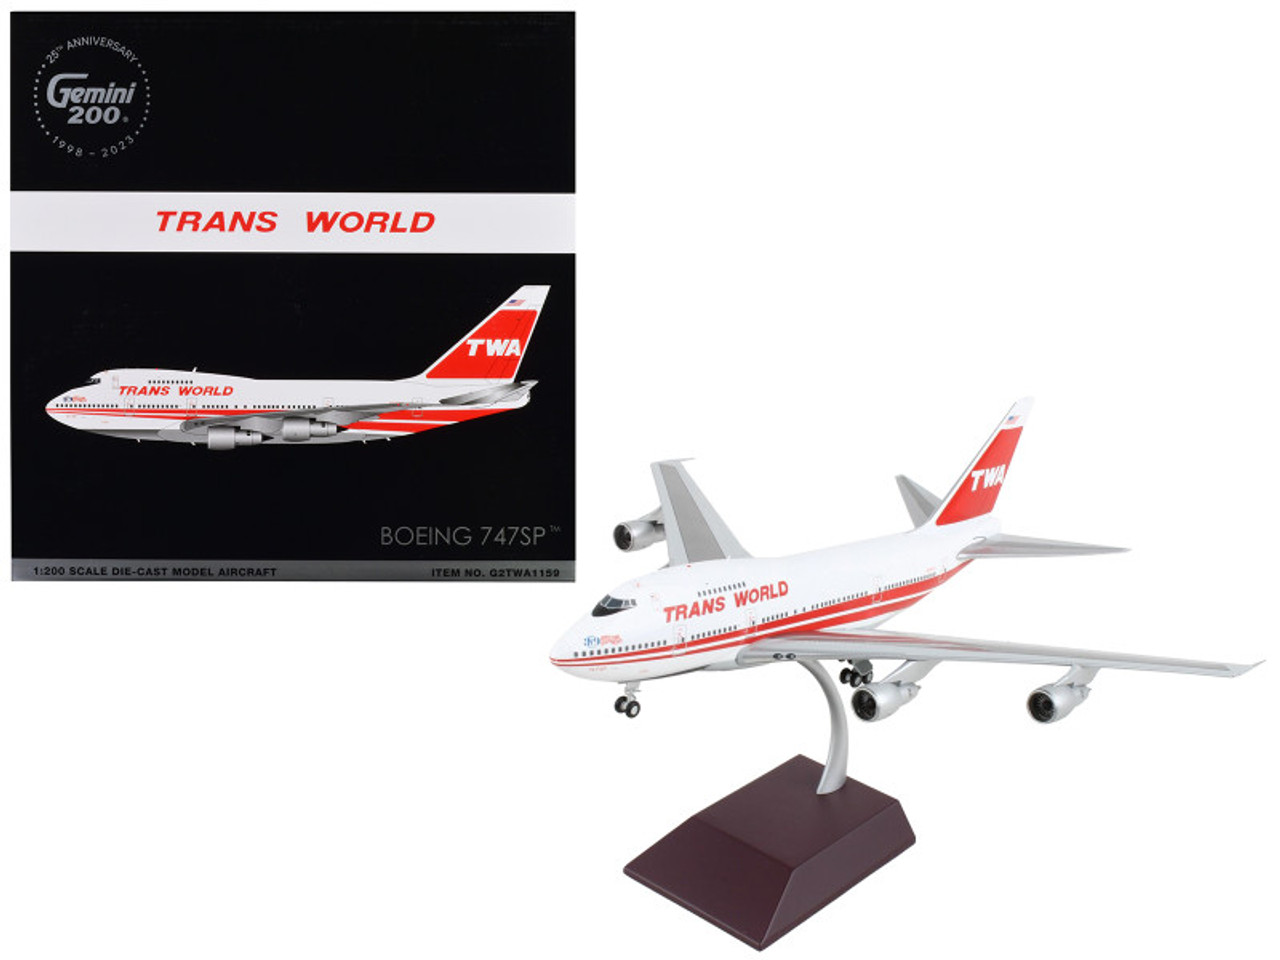 Boeing 747SP Commercial Aircraft "TWA (Trans World Airlines)" White with Red Stripes and Tail "Gemini 200" Series 1/200 Diecast Model Airplane by GeminiJets